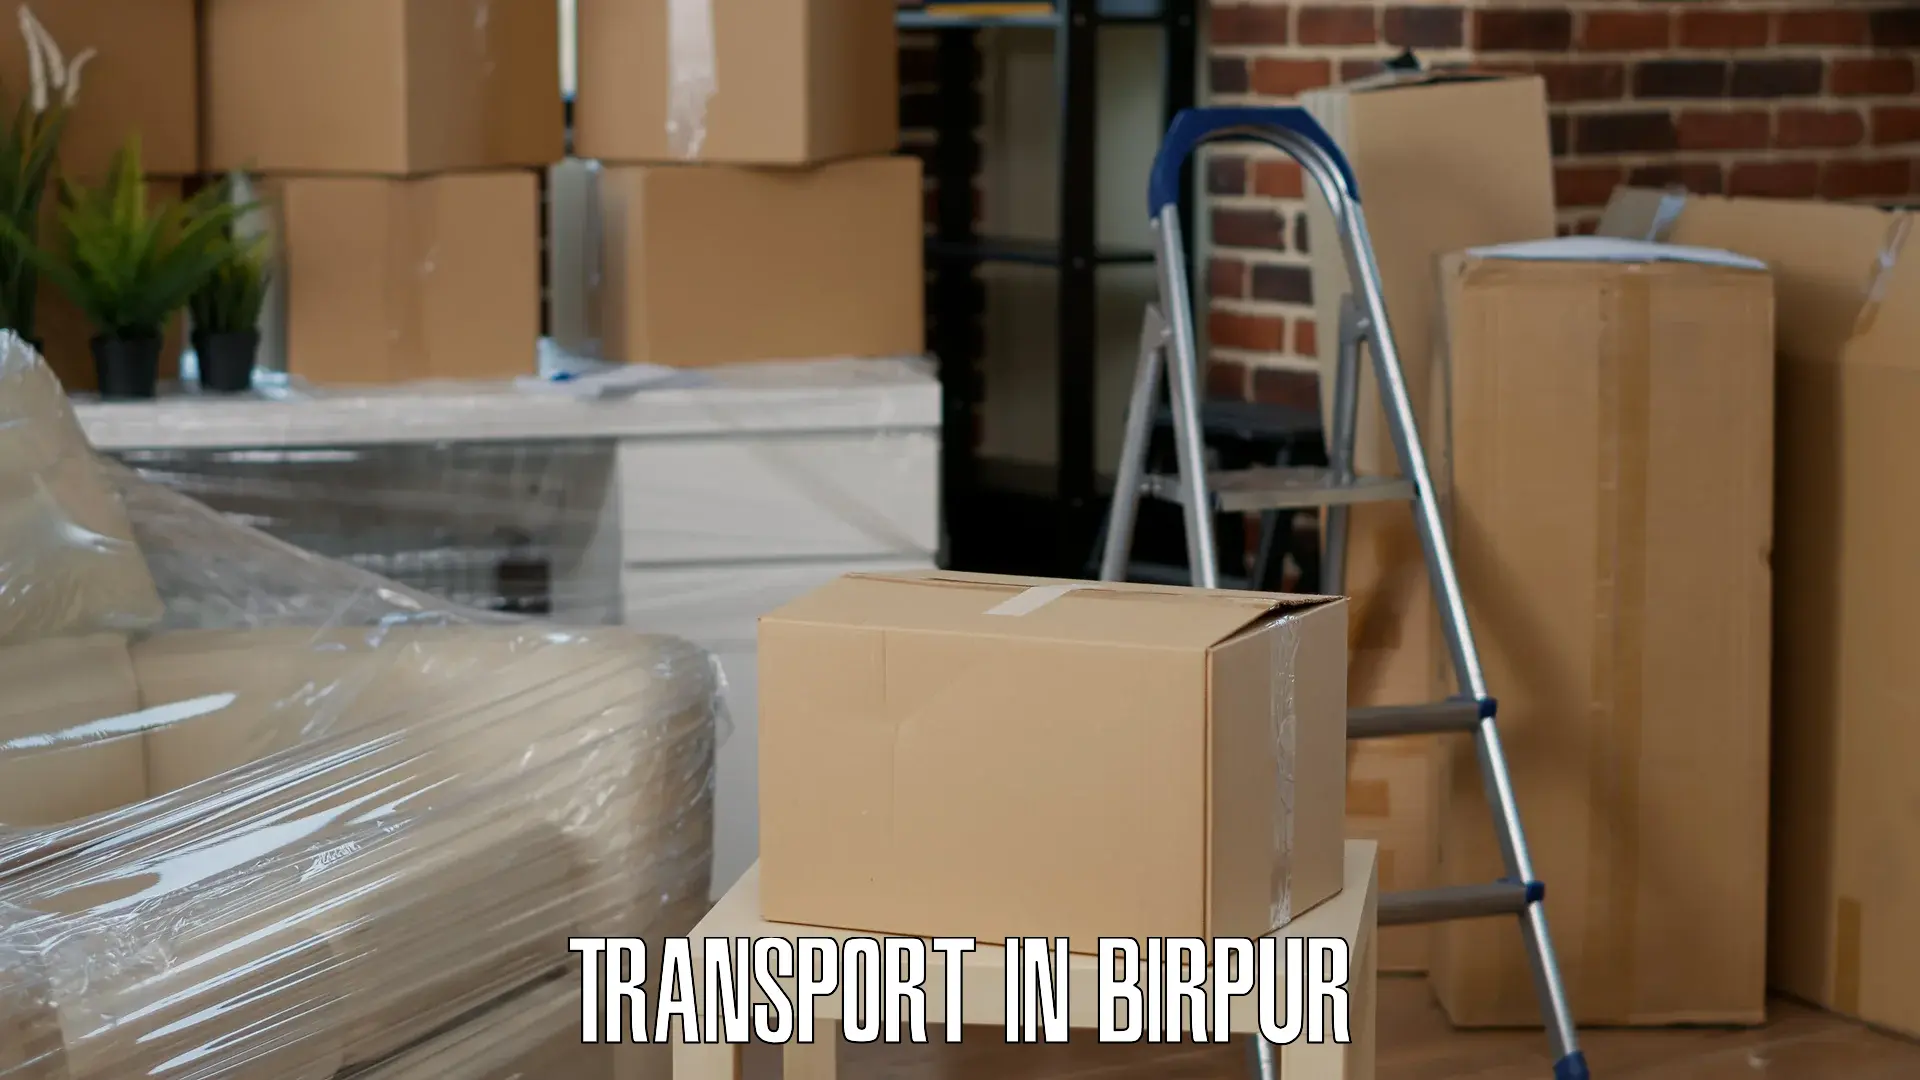 Air freight transport services in Birpur